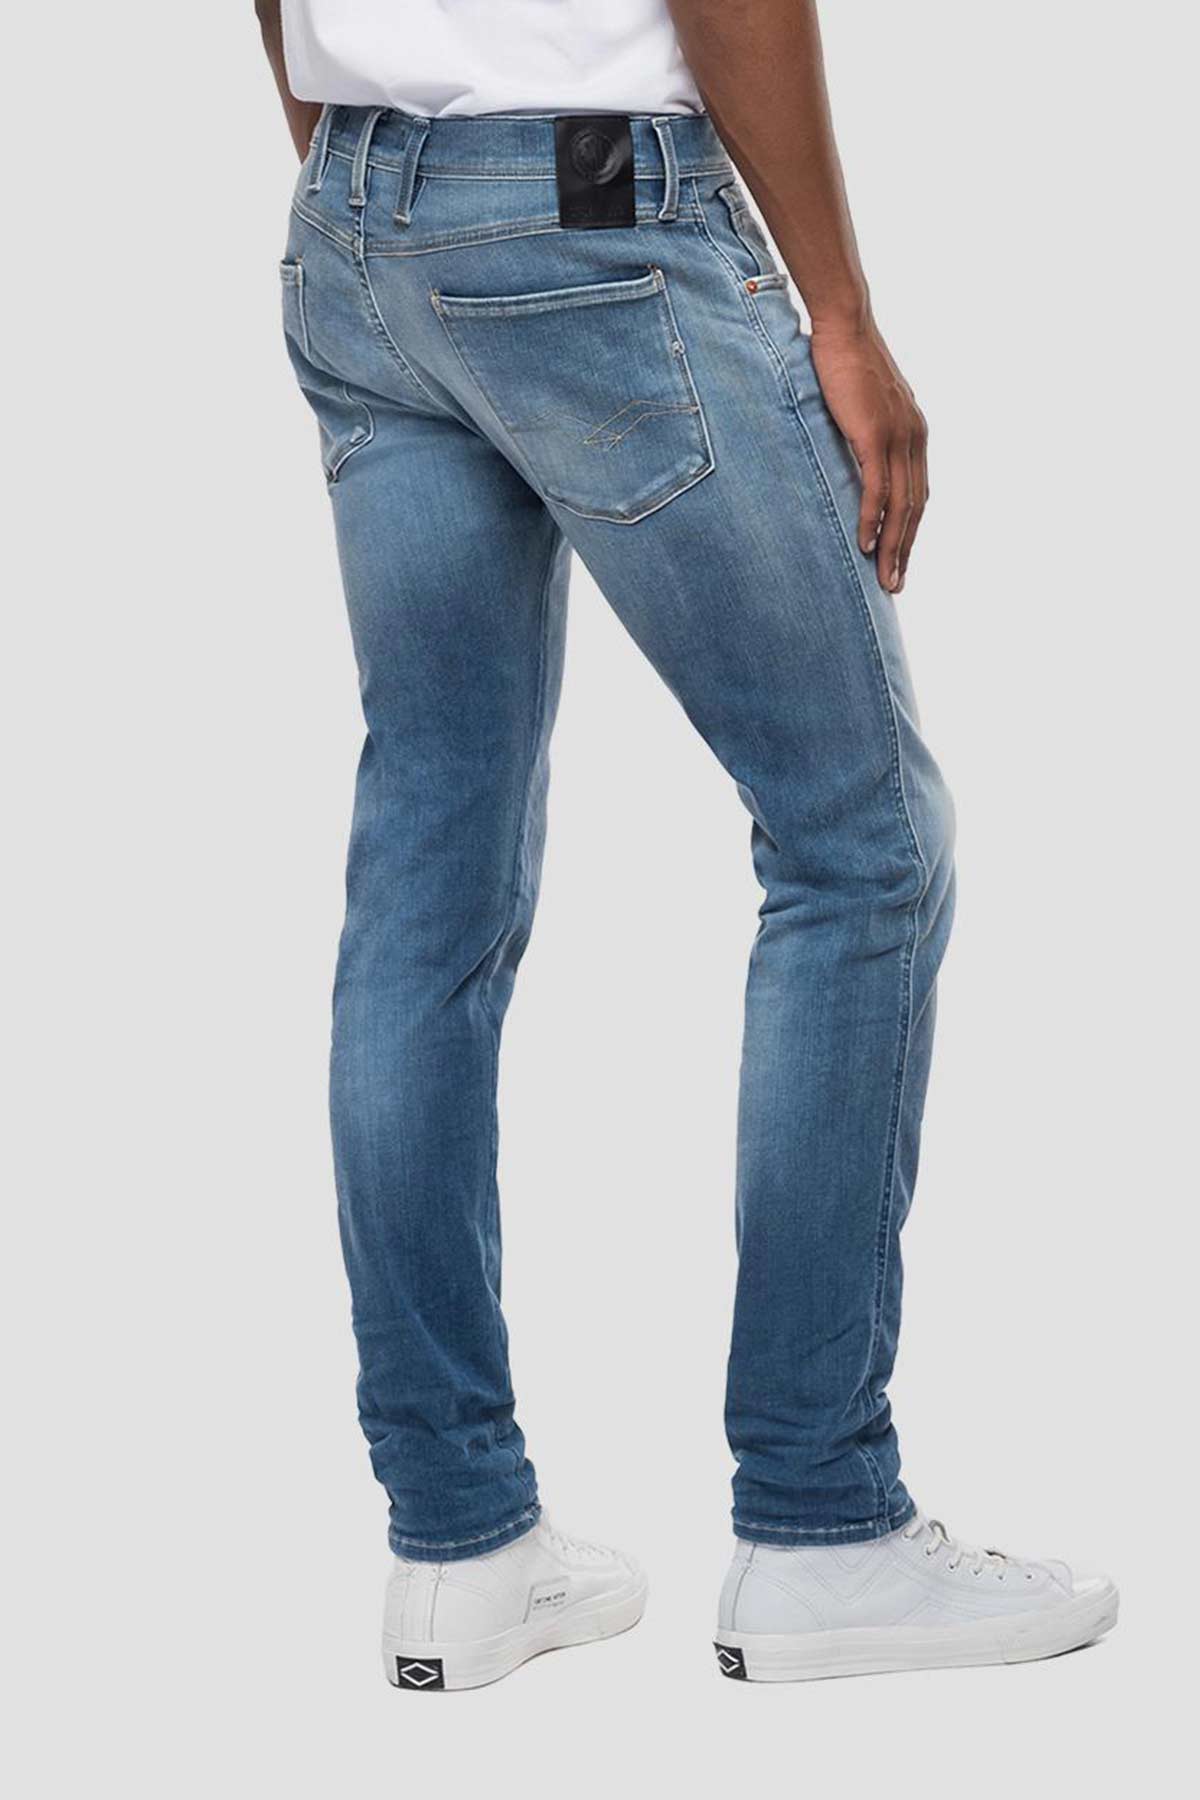 Replay Anbass Hyperflex Re-Used Slim Fit Jeans-Libas Trendy Fashion Store